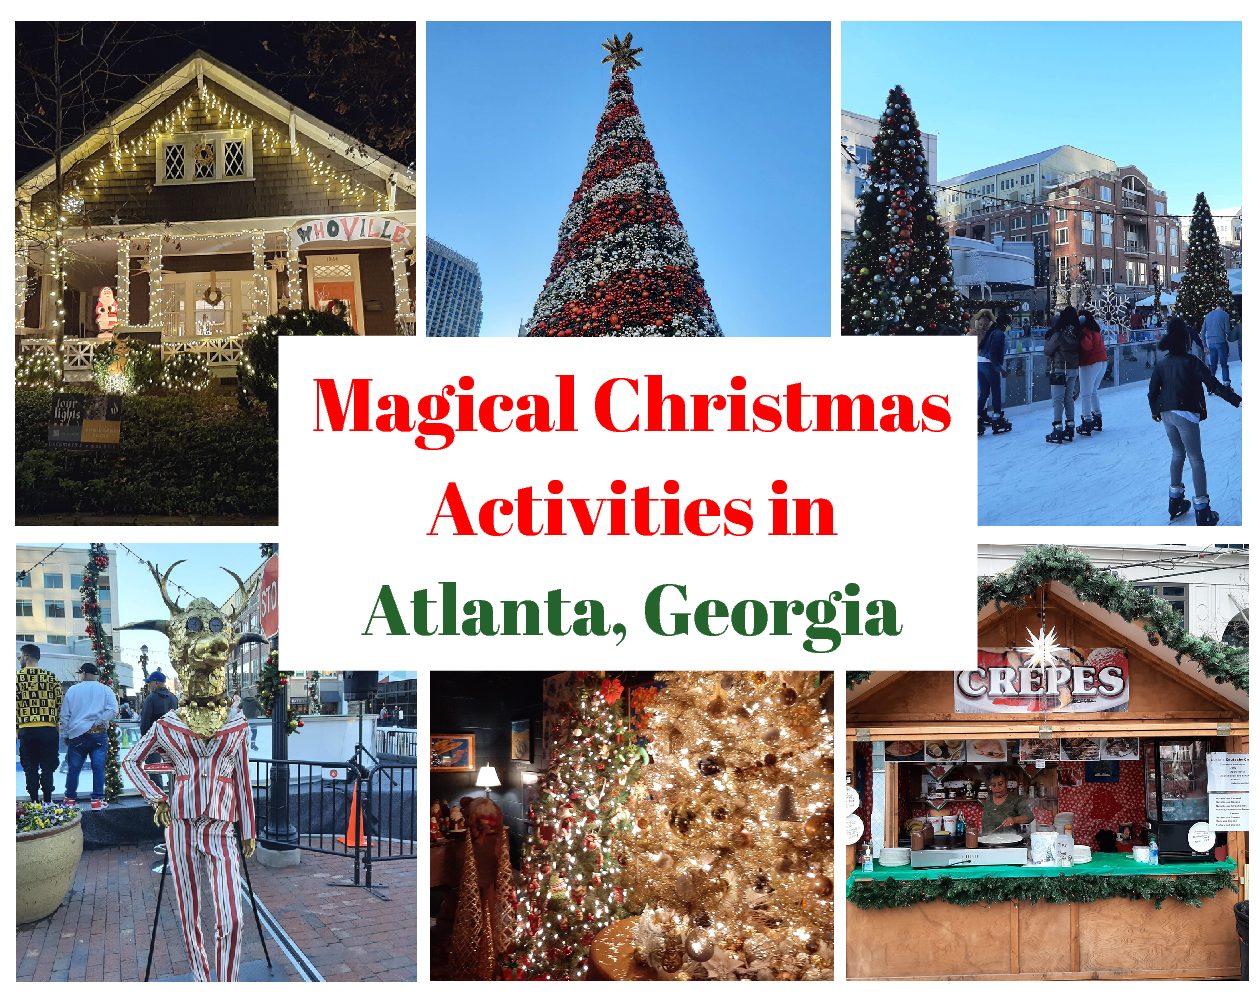 https://www.thefearlessforeigner.com/wp-content/uploads/2022/11/Magical-Christmas-Activities-in-Atlanta-pdf.jpg